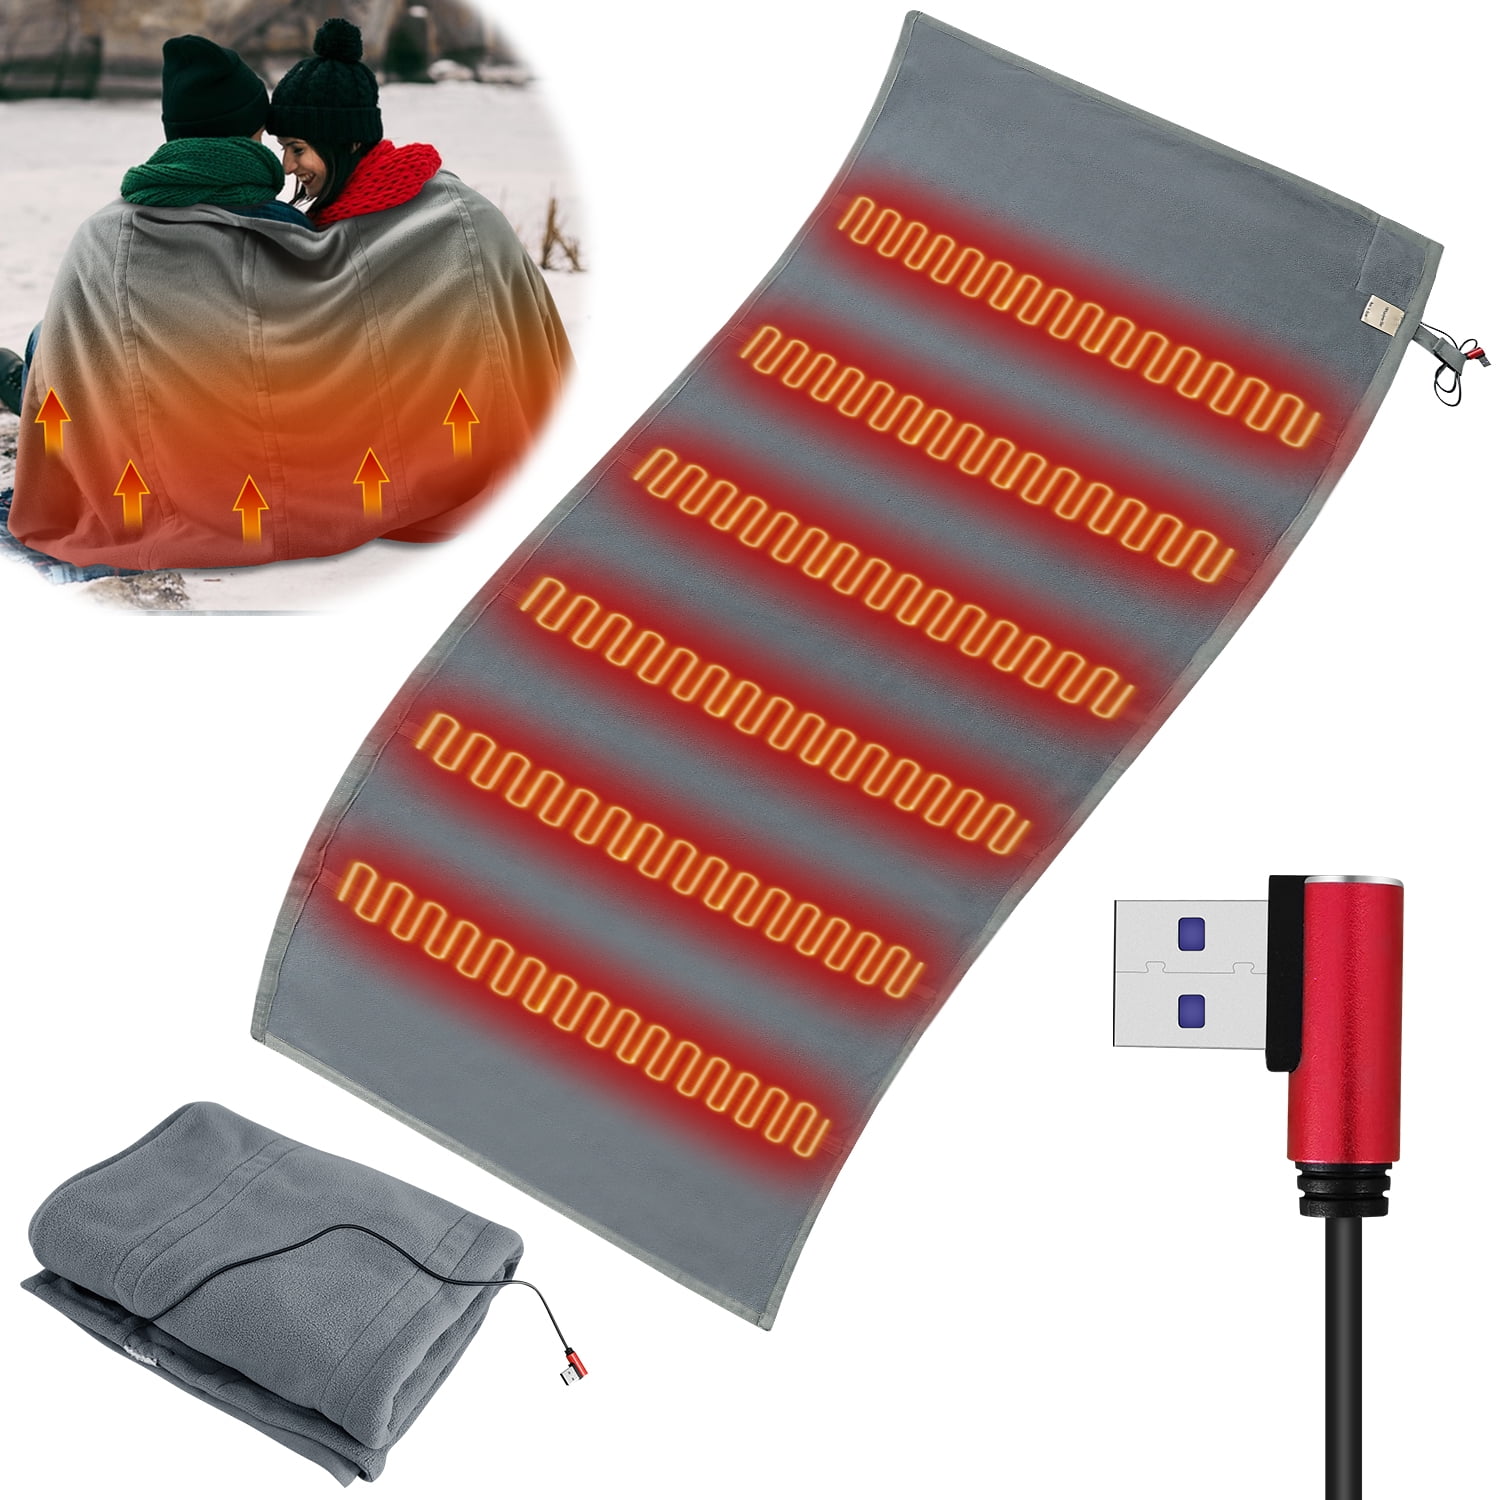 USB Heated Blanket Battery Operated - Upgrade Portable Electric Blanket  Rechargeable Cordless Heating Blanket Throw for Camping Stadium (Battery  Not